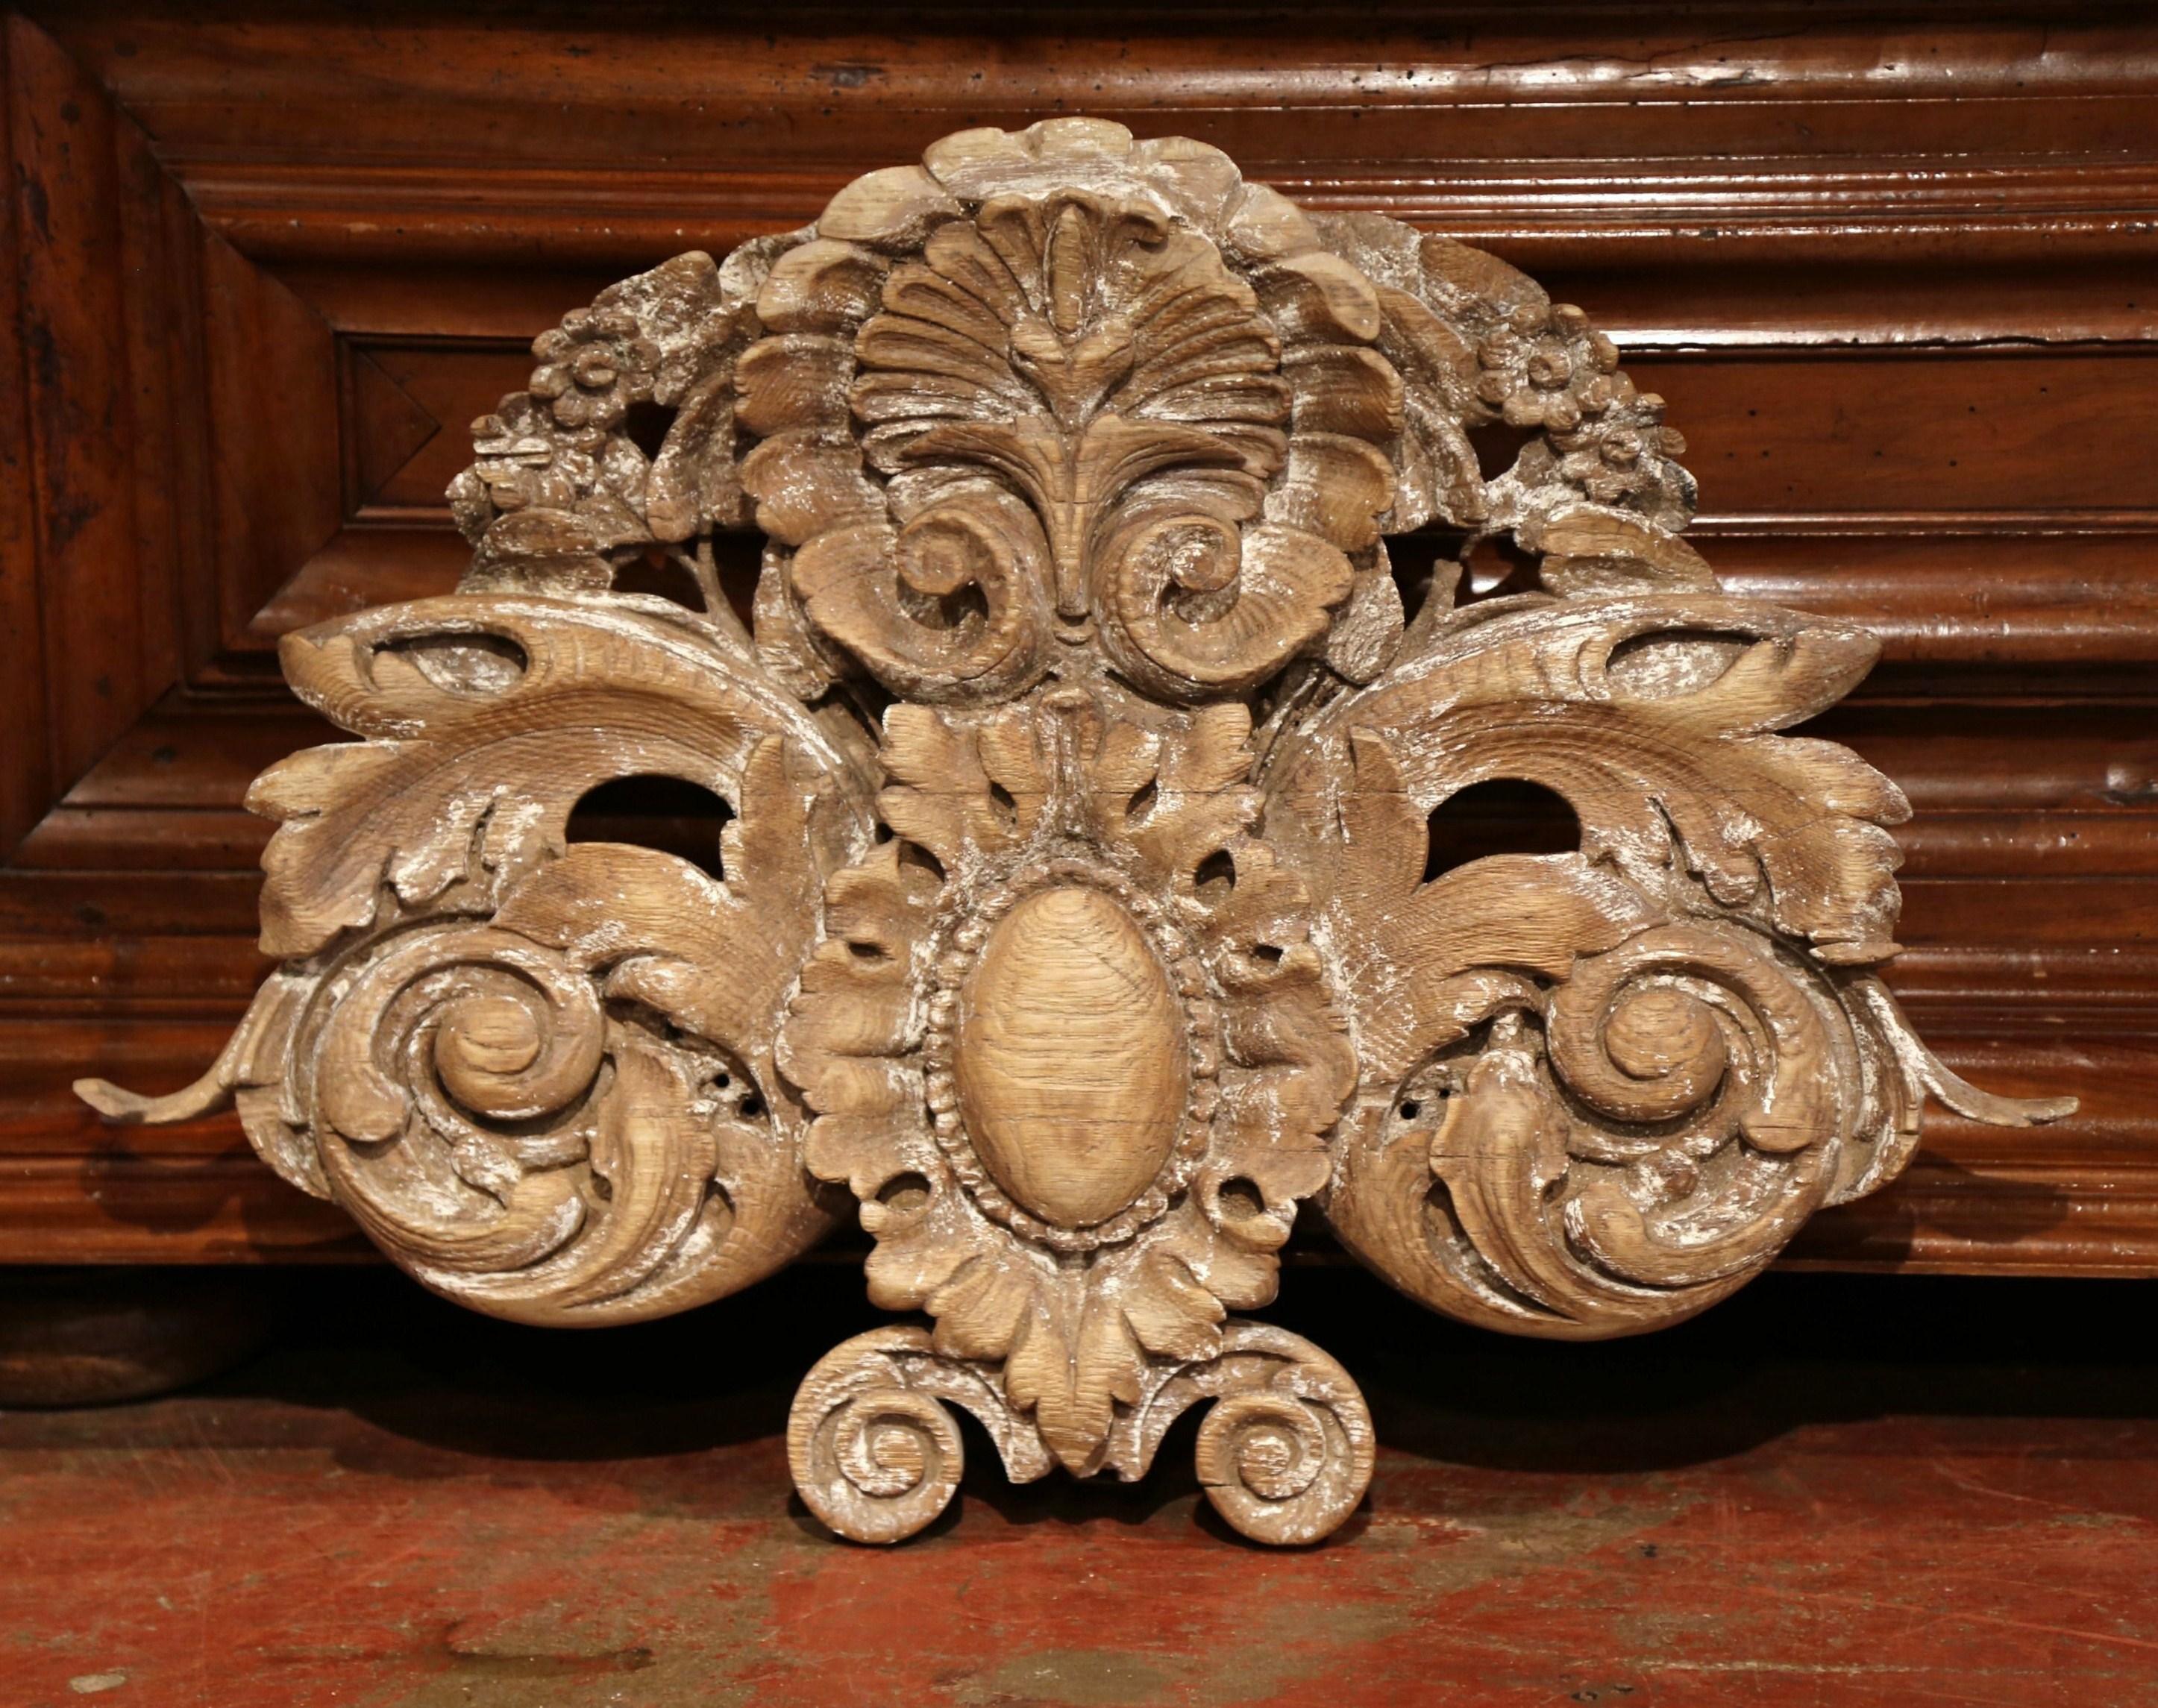 Hand-Carved 18th Century French Carved Oak Painted Wall Sculpture with Center Shell Motif